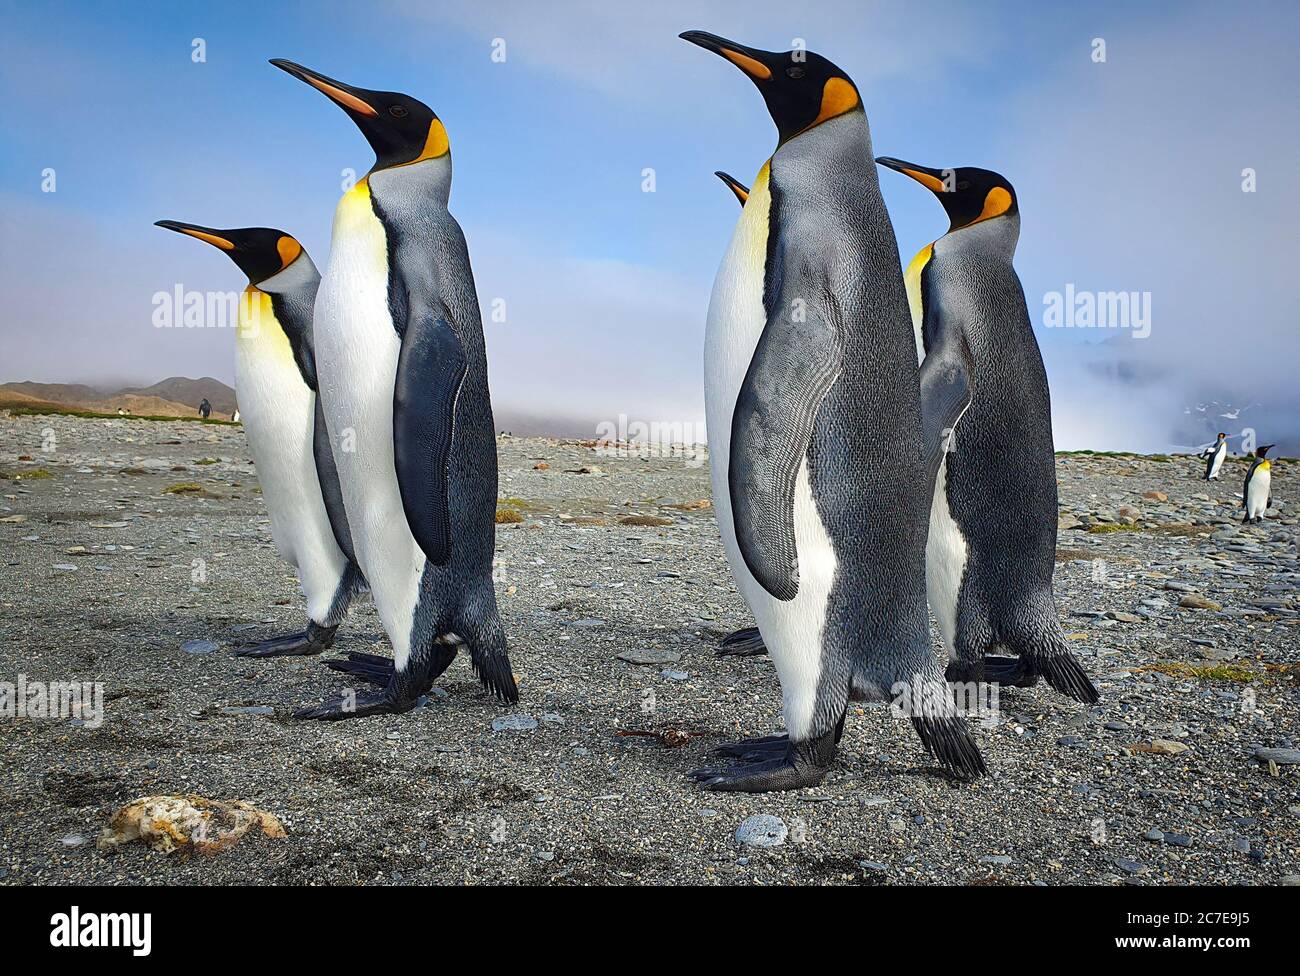 Five king penguins stood upright  on grey sand with clouds and hills in the background in South Georgia Stock Photo